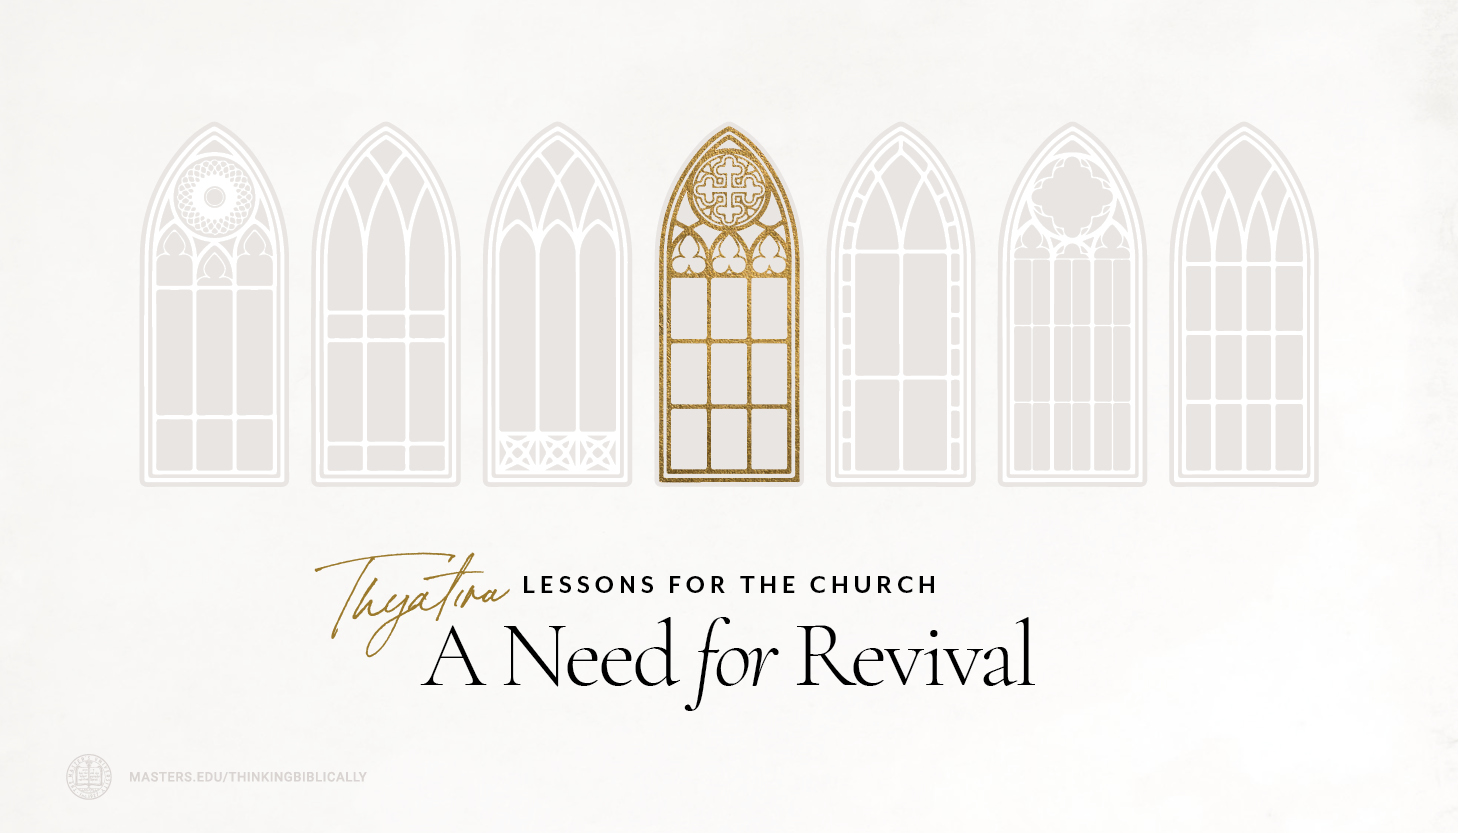 Thyatira: A Need for Revival